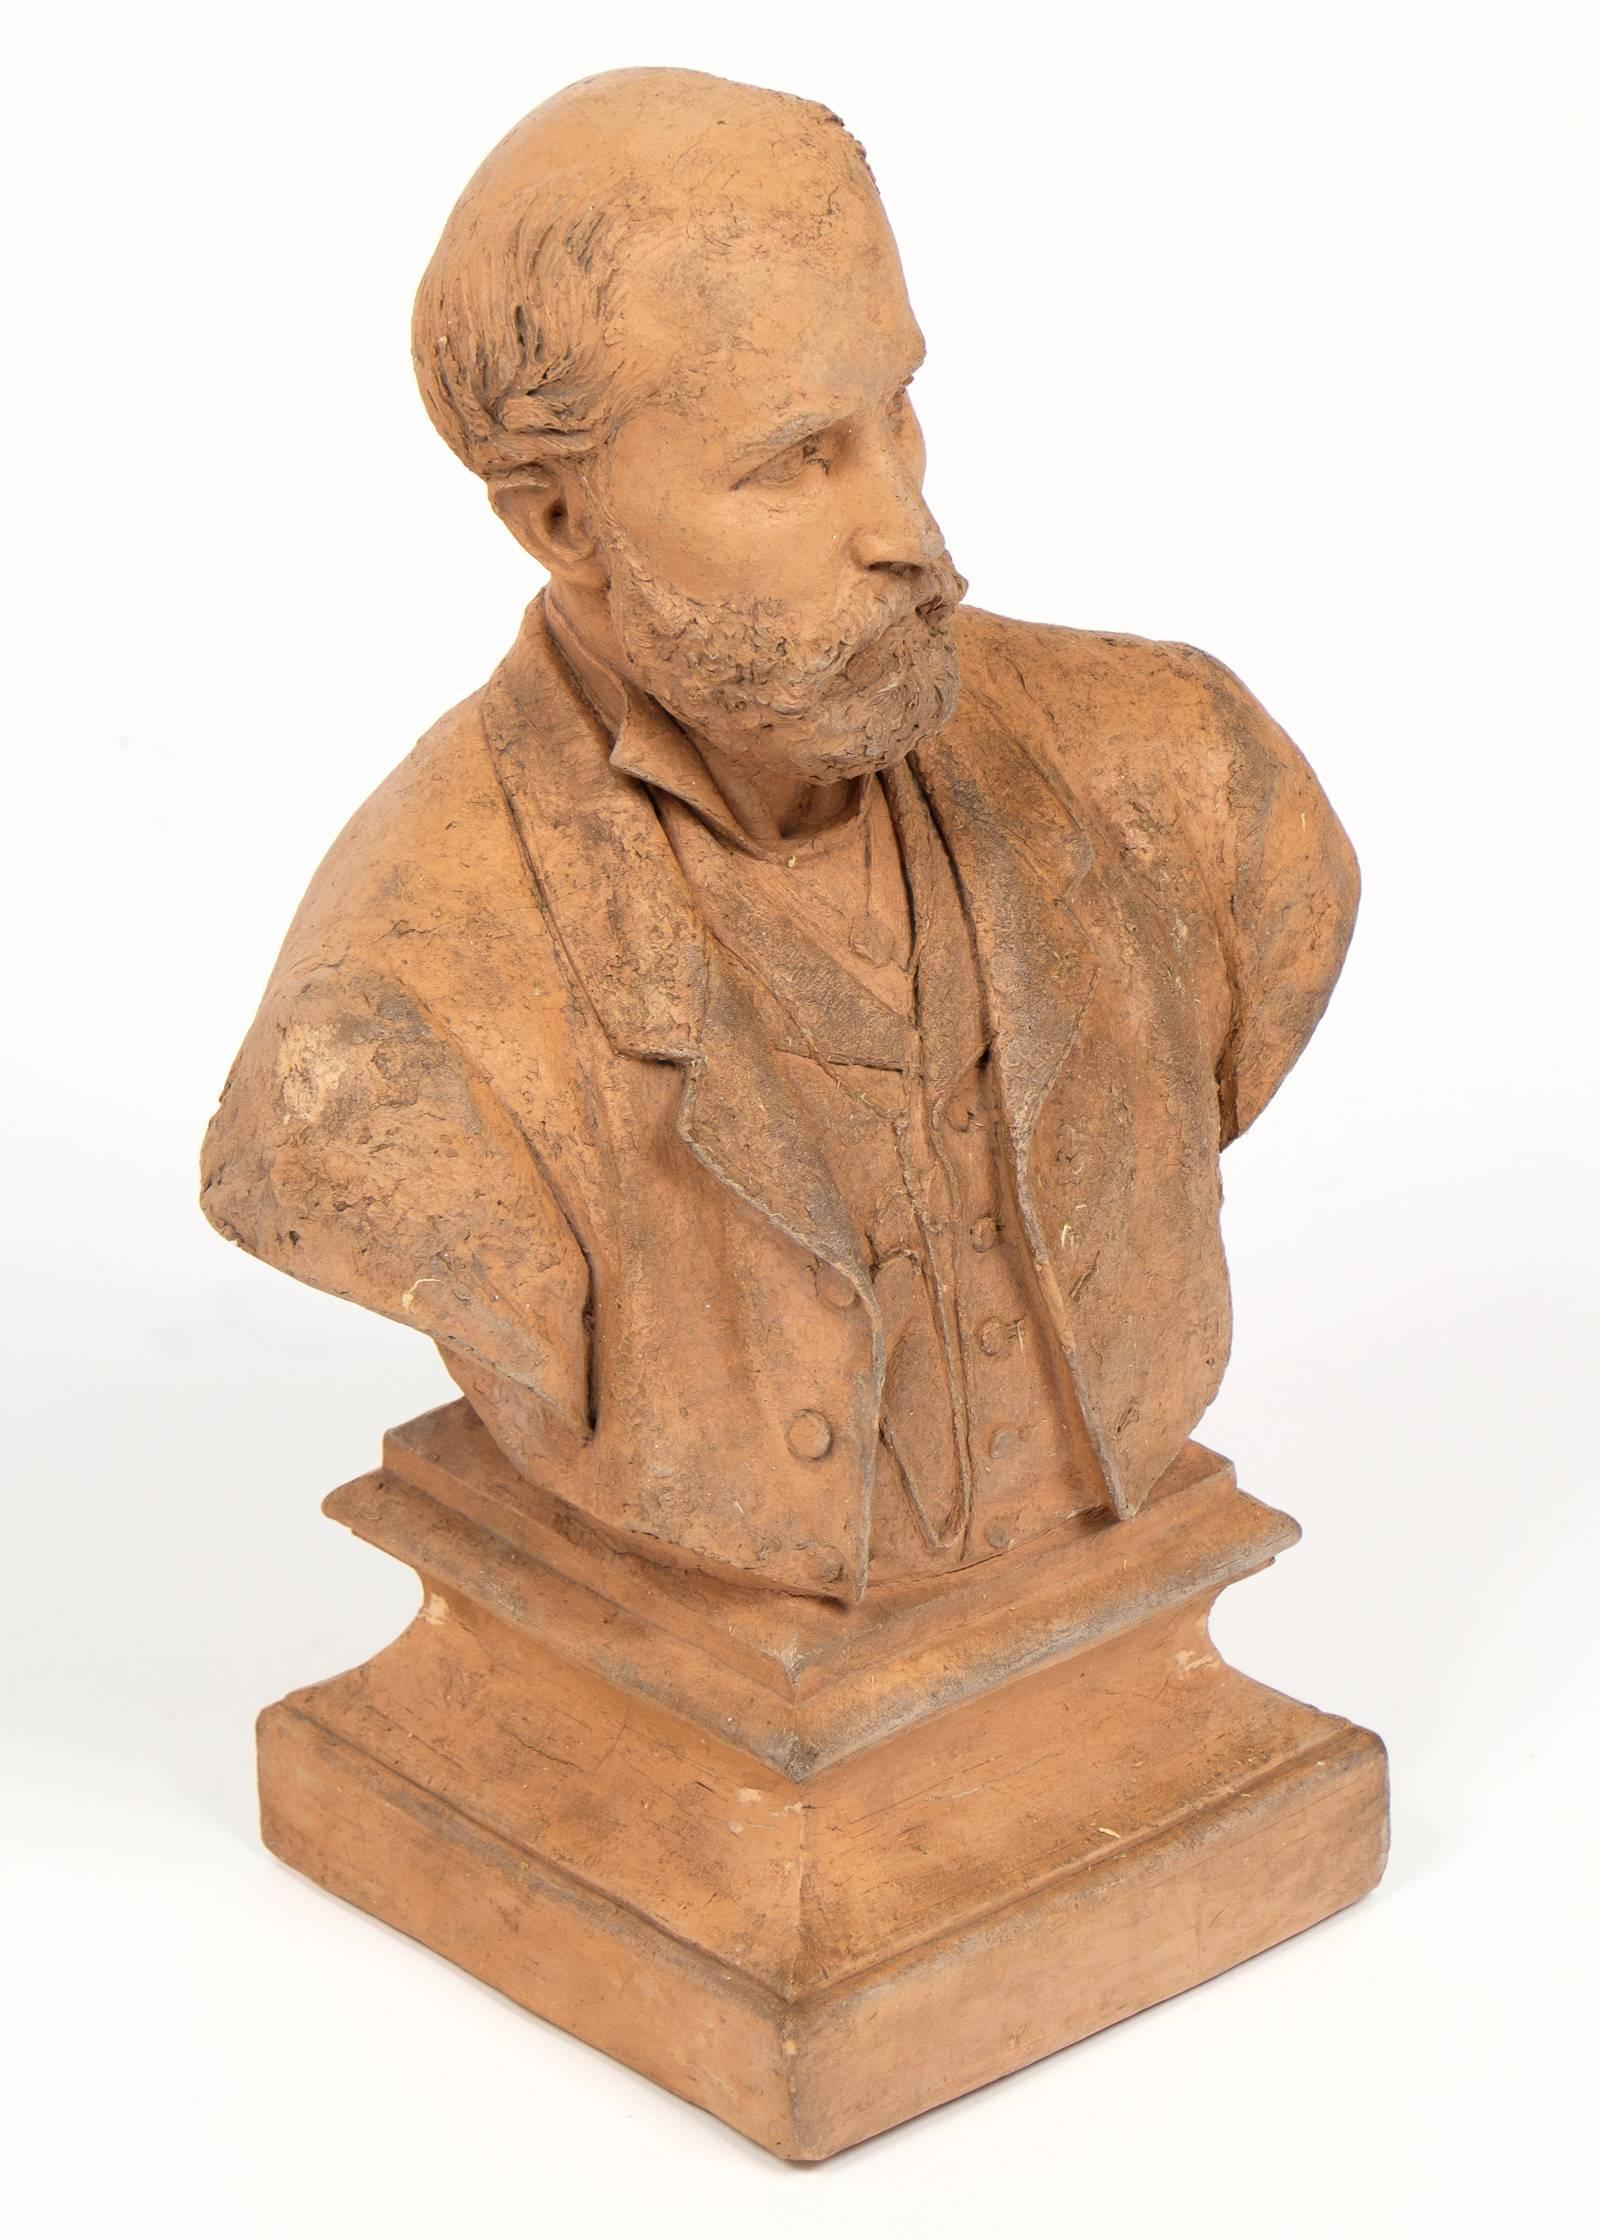 Napoleon III 19th Century French Bust Sculpture of a Gentleman